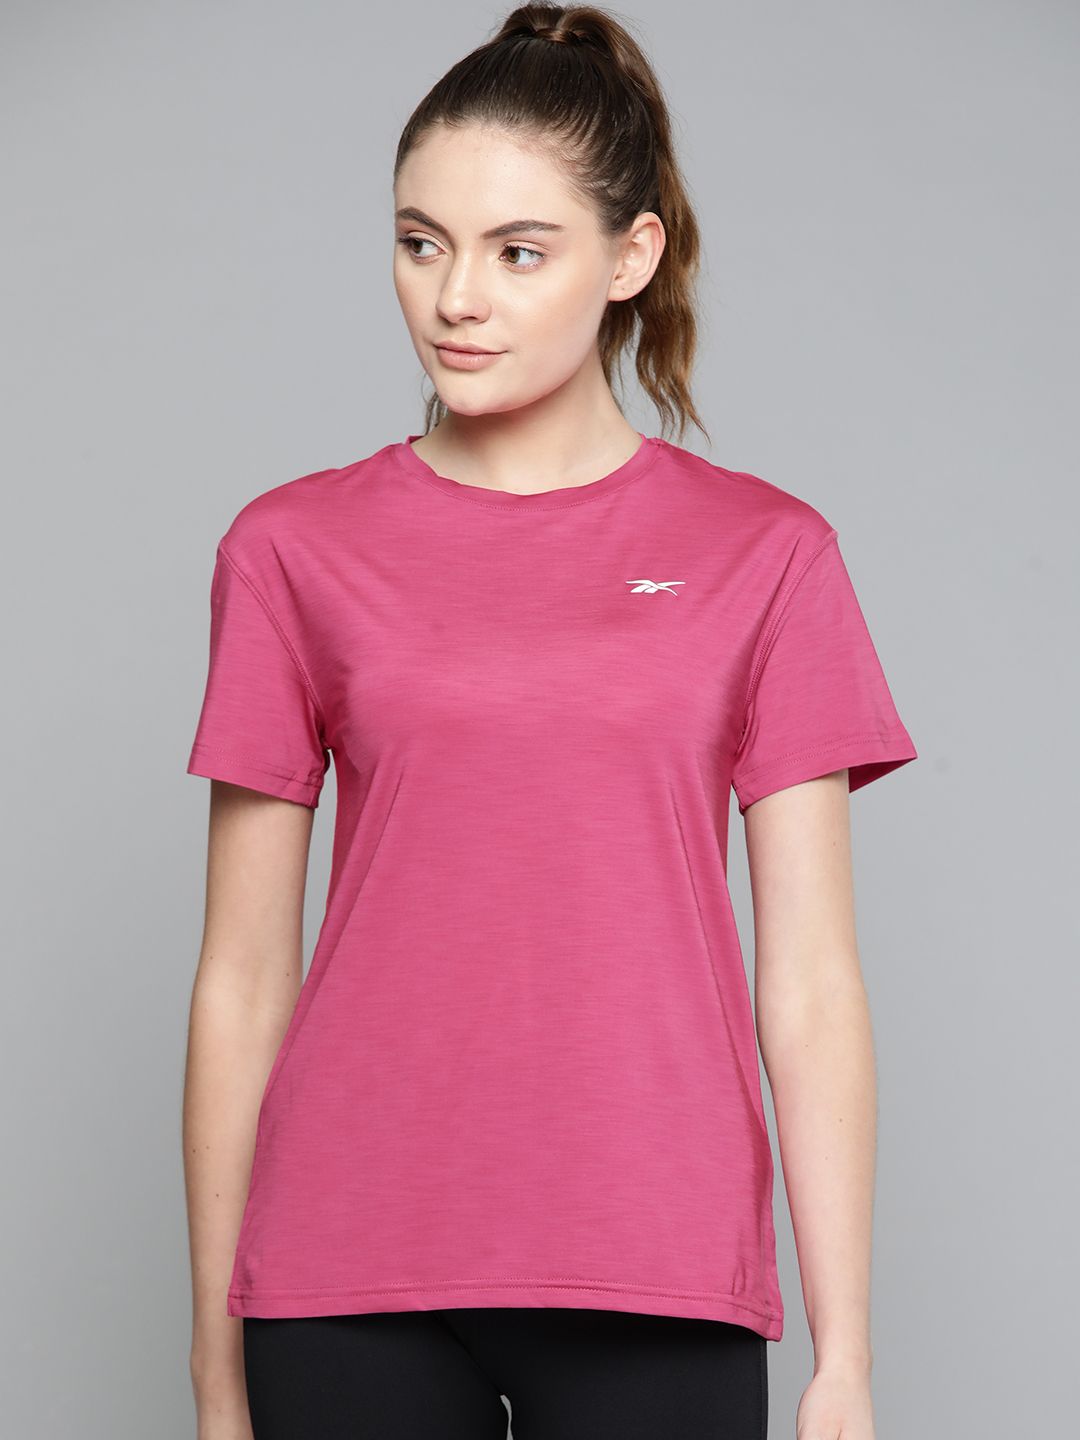 Reebok Women Pink TS ACTIVCHILL Athletic Solid Training T-Shirt Price in India